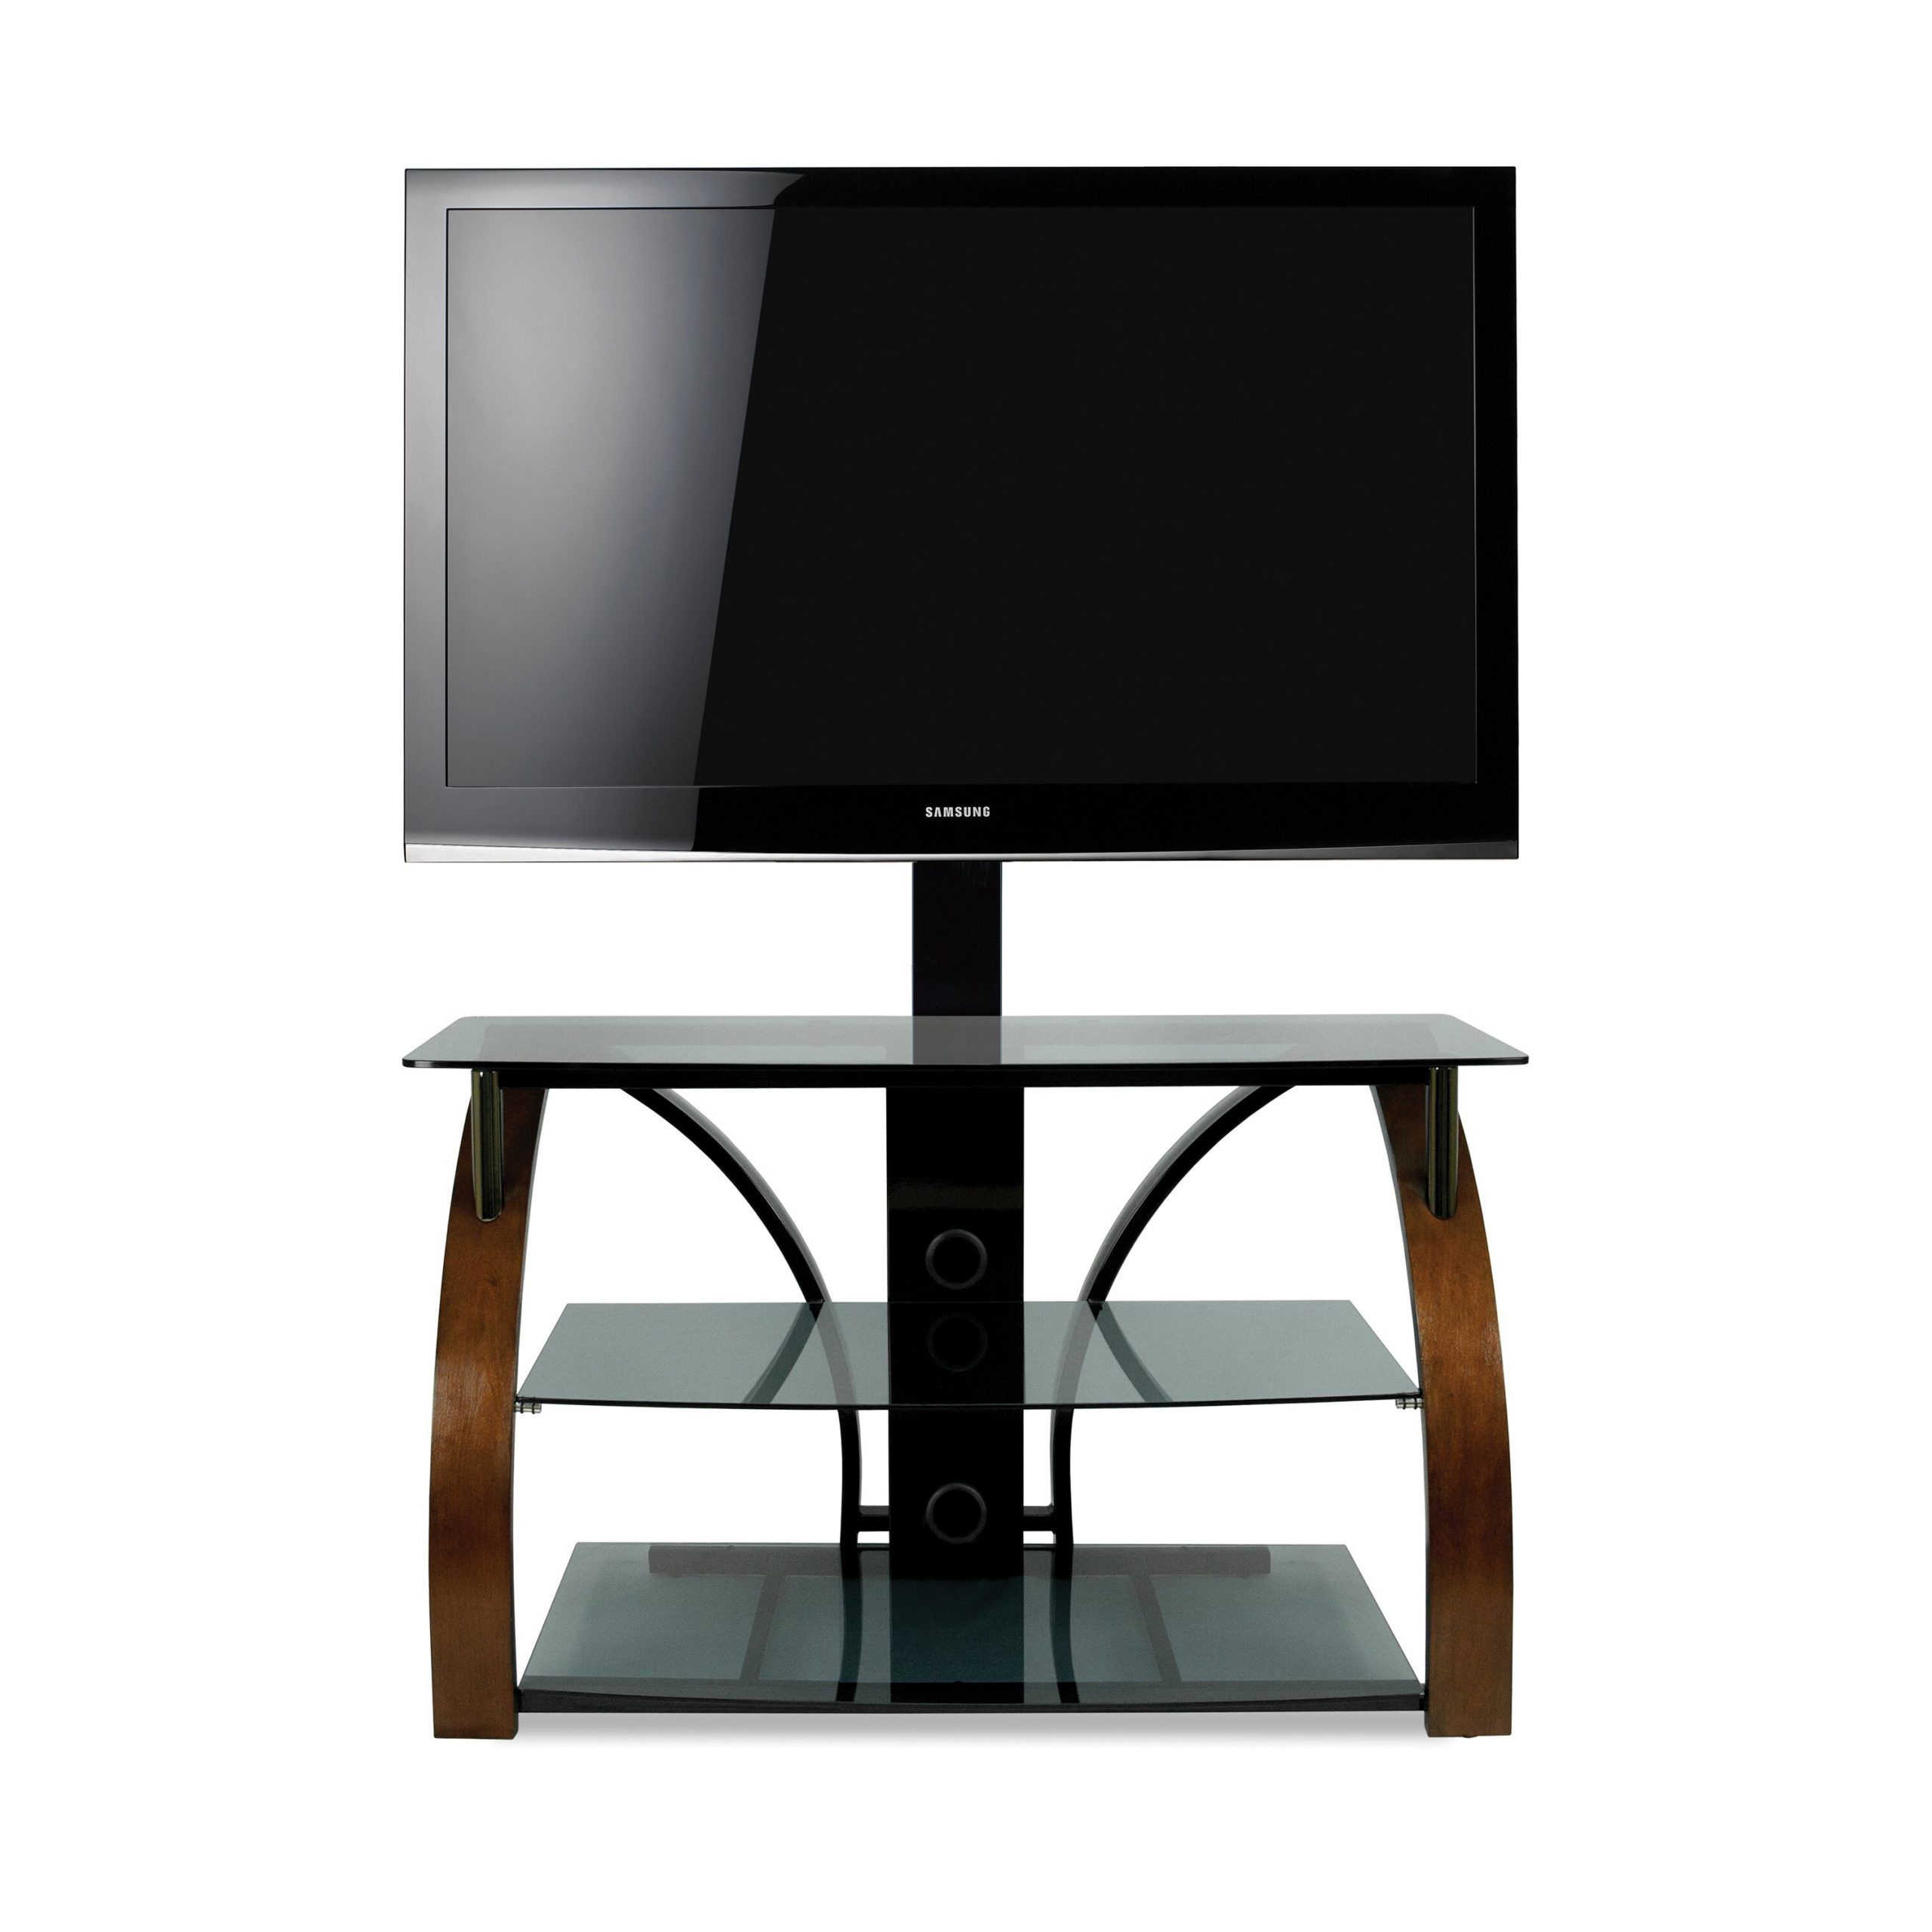 Bello Tv Stand & Reviews | Wayfair Pertaining To Bjs Tv Stands (View 2 of 15)